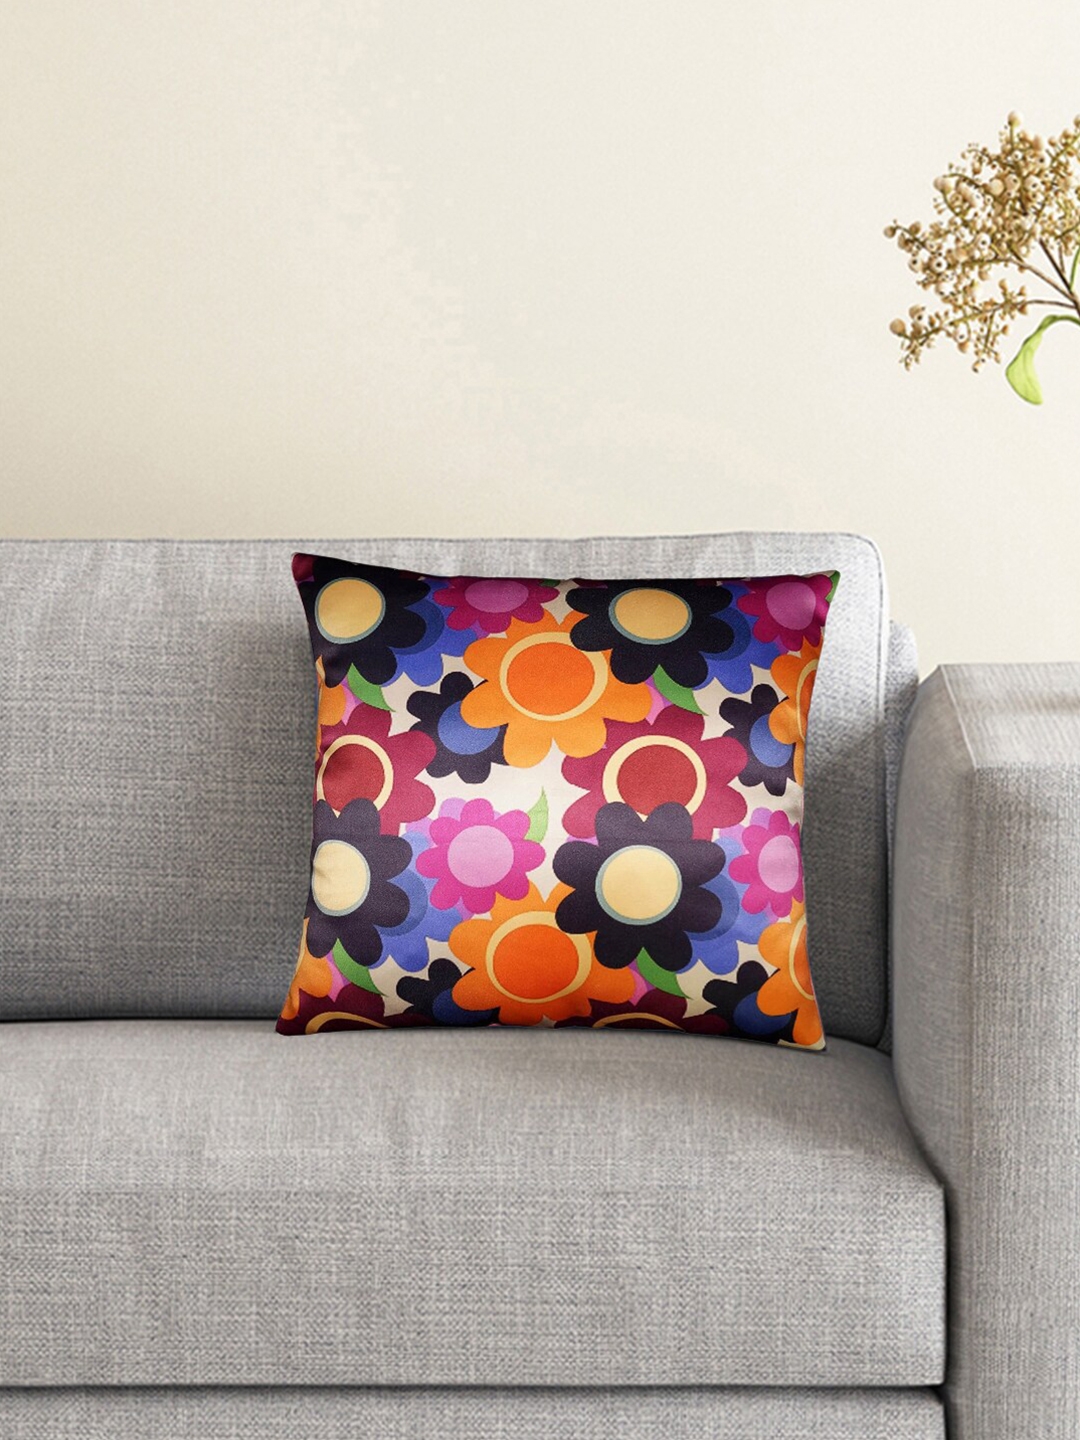 Lushomes Multicoloured Floral Square Cushion Cover